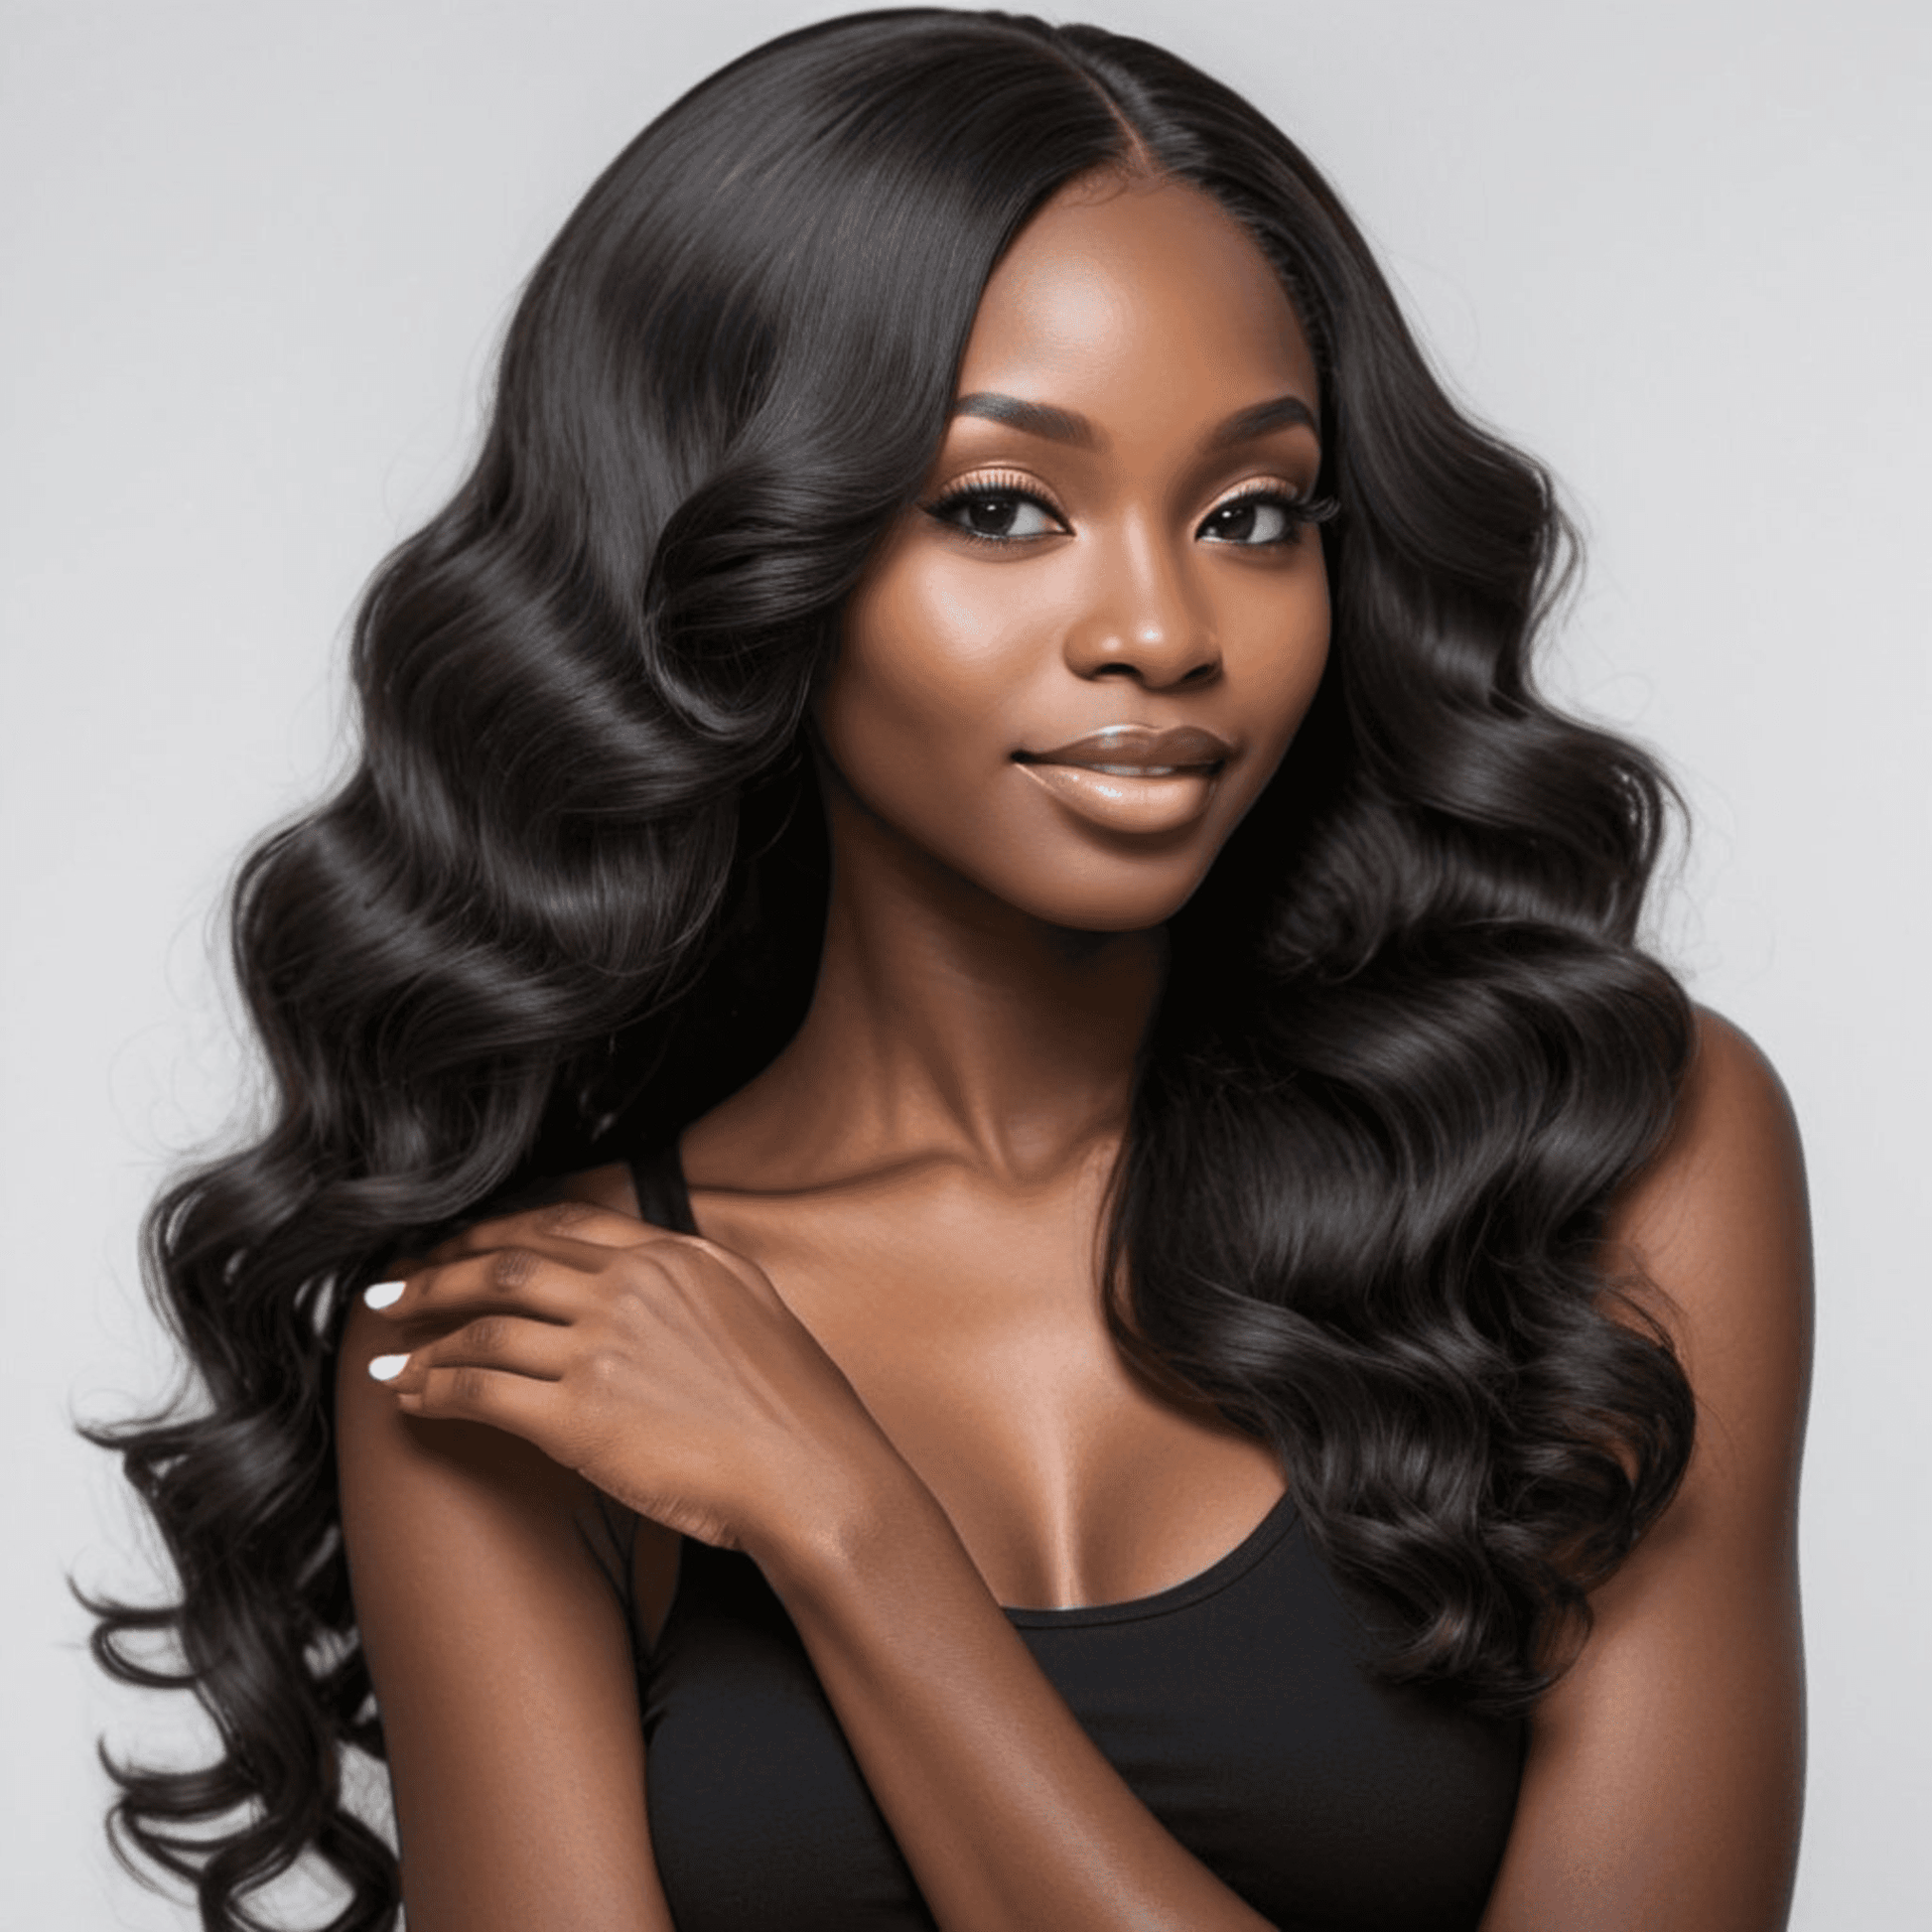 CAPD HD Lace 5x5 Closure Body Wave Glueless Wig - CAPD INSPIRED HAIR INC.